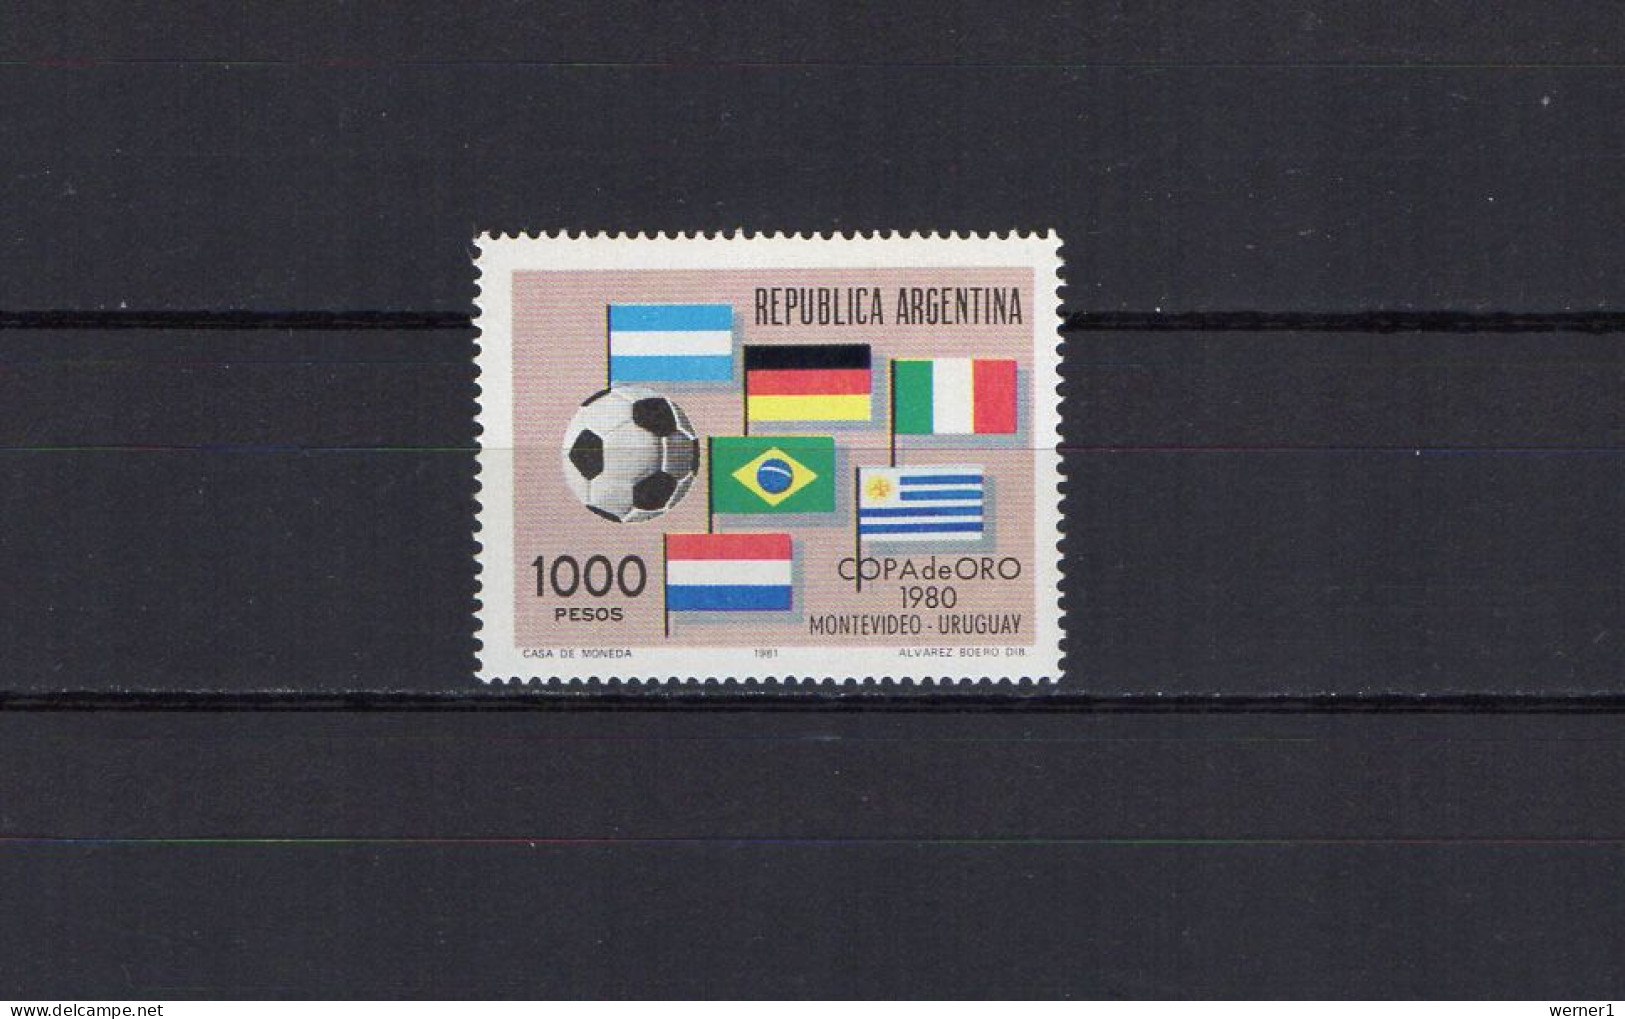 Argentina 1981 Football Soccer Gold Cup Stamp MNH - Copa America